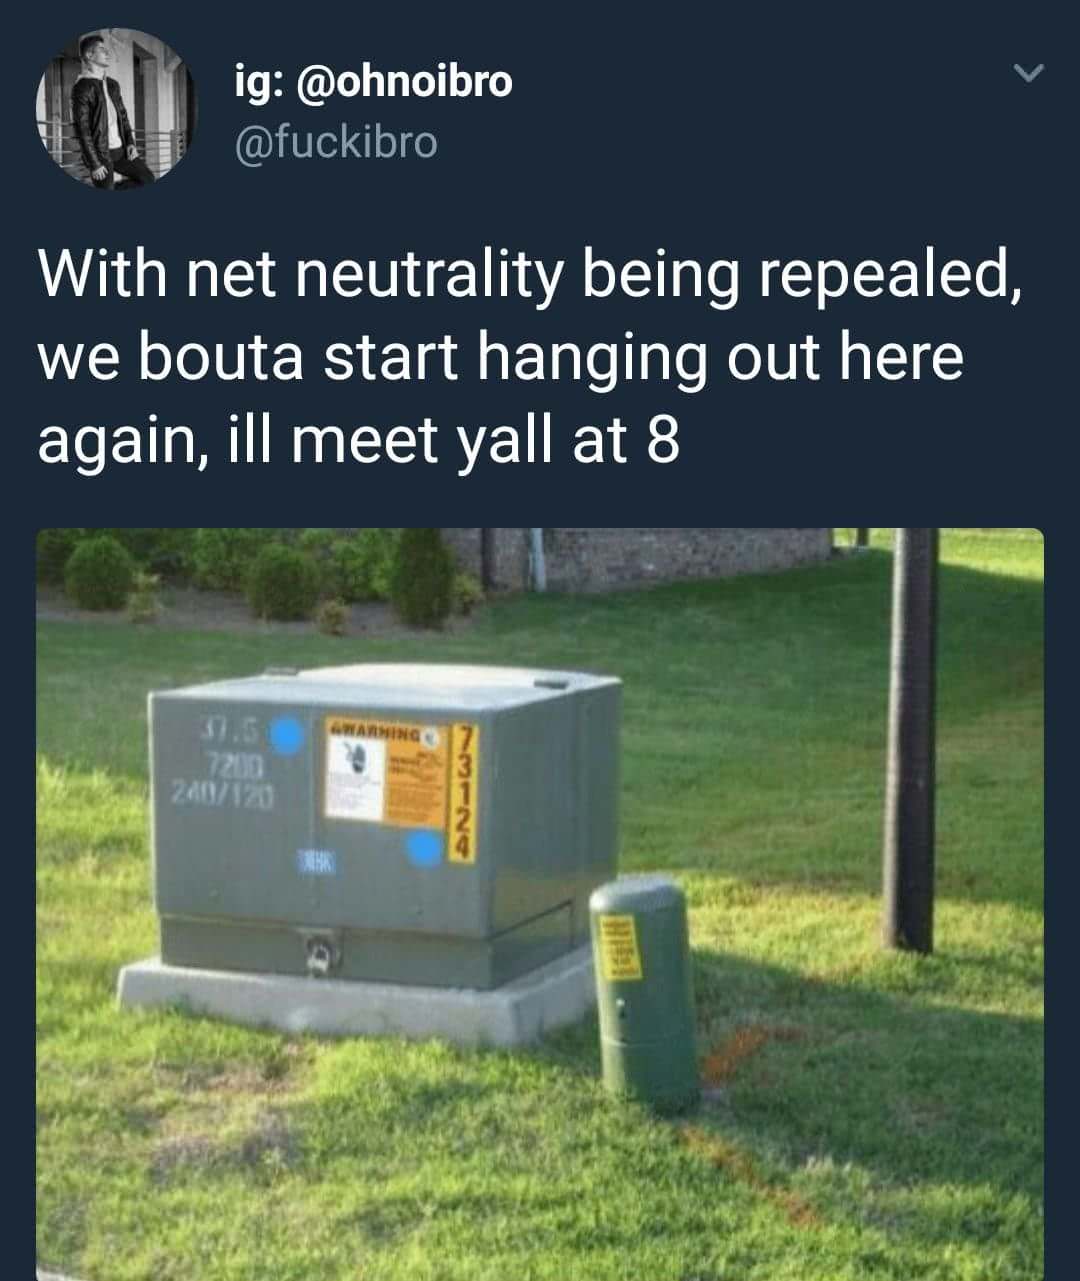 90 kids chill spot - ig With net neutrality being repealed, we bouta start hanging out here again, ill meet yall at 8 240120 On